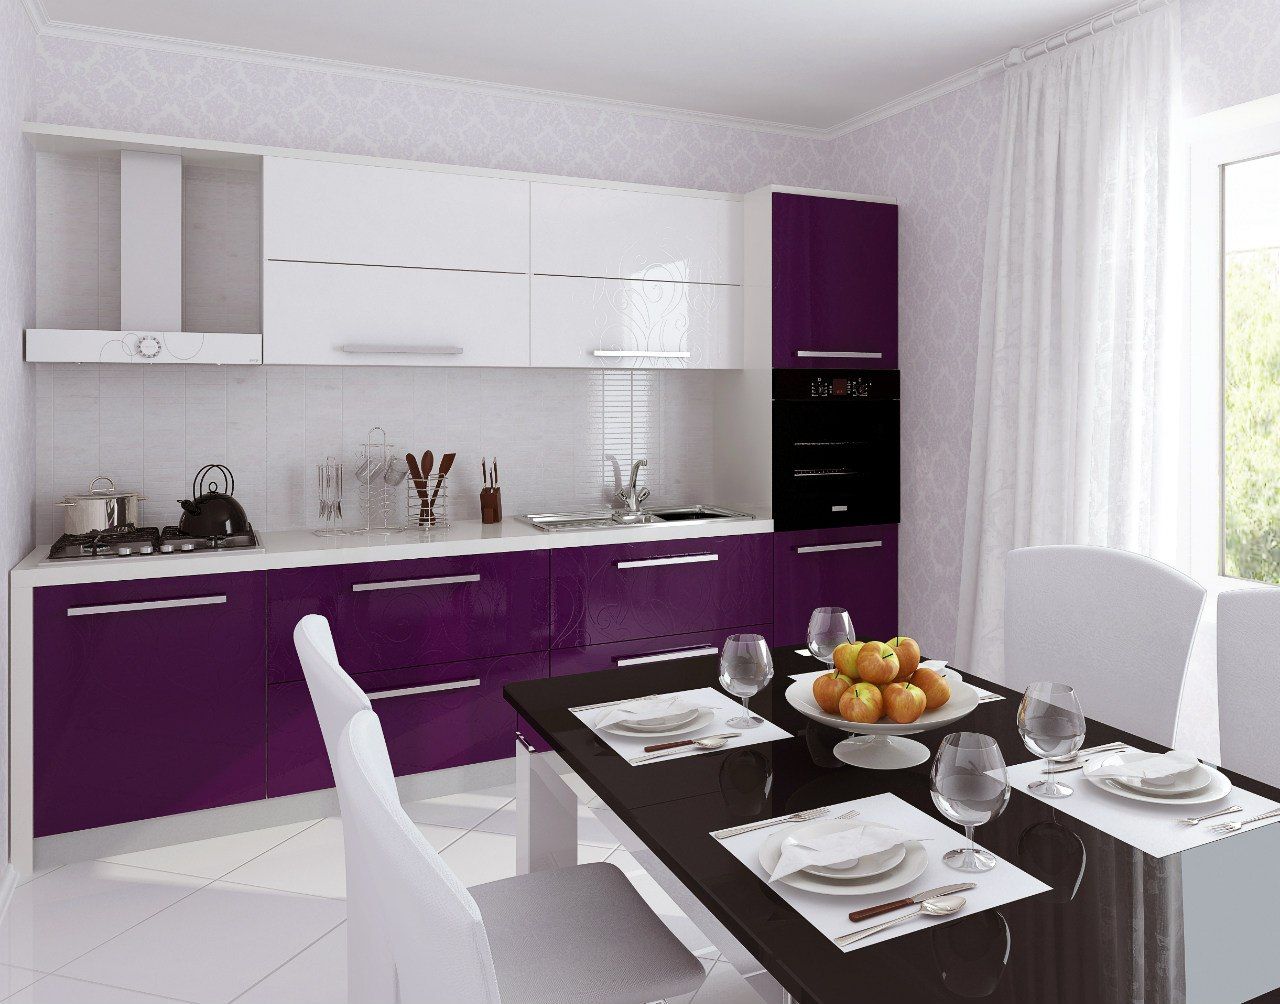 White kitchen interior with dominant colors.